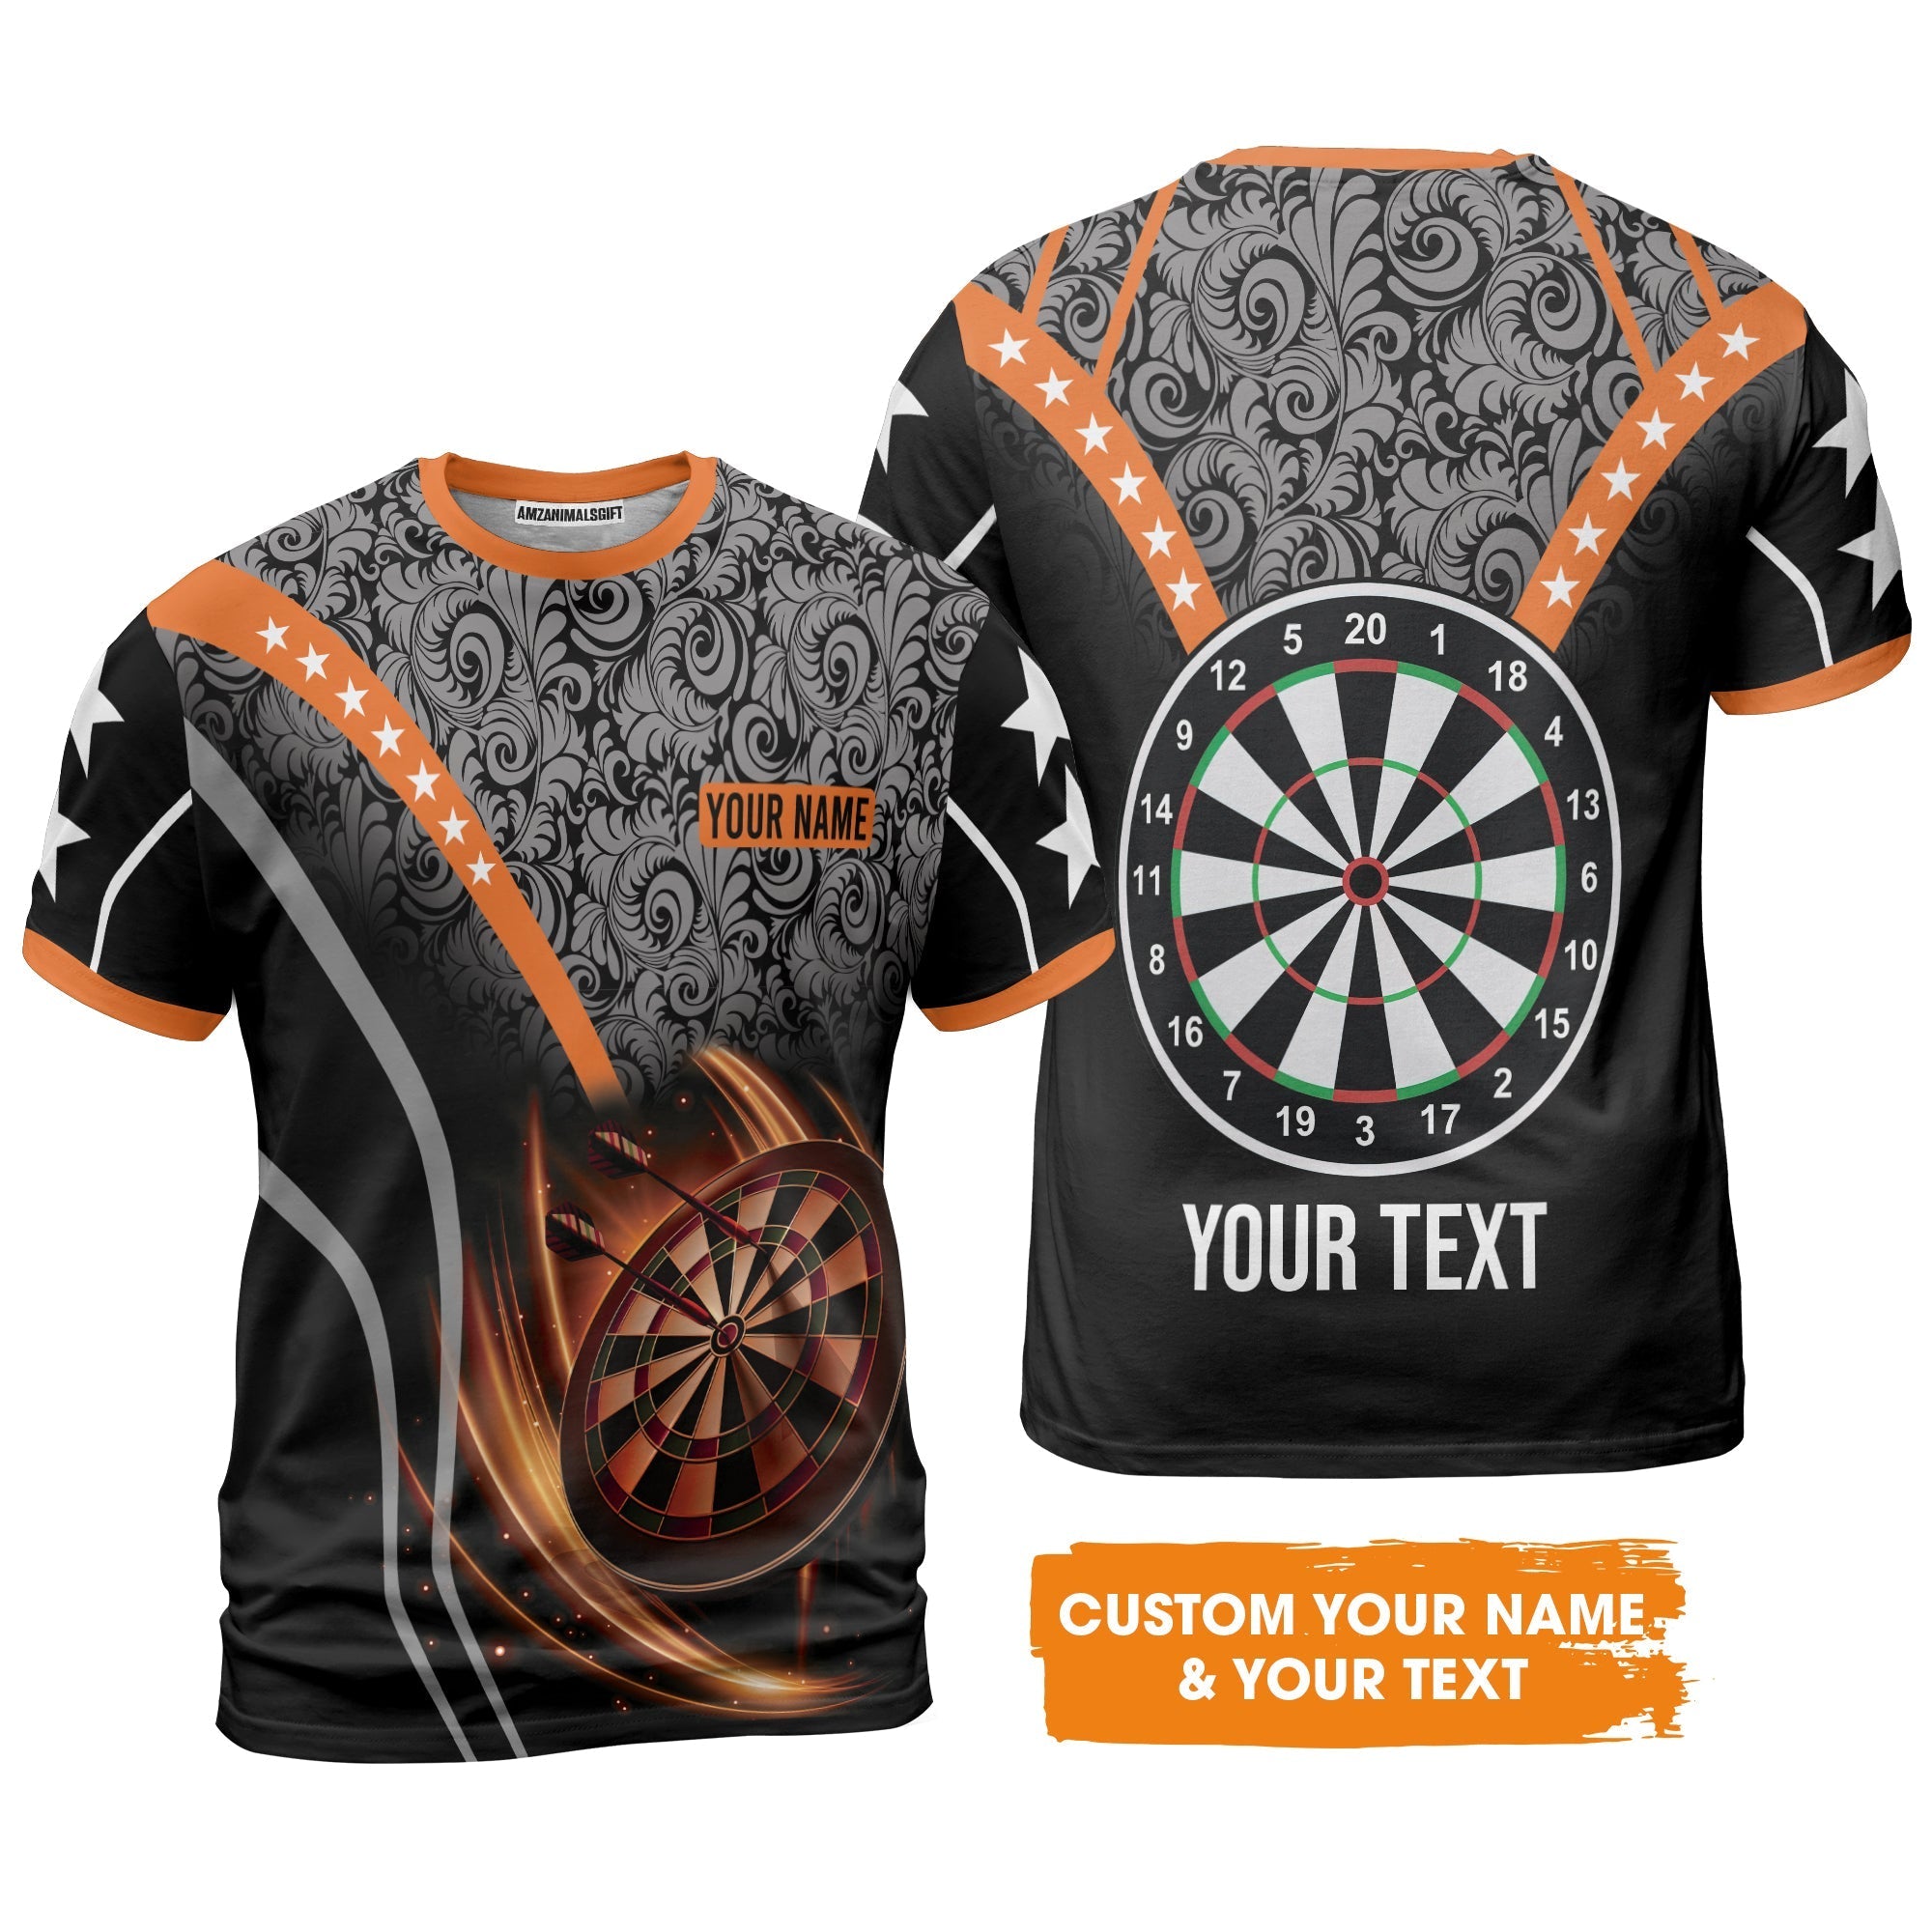 Customized Name & Text Darts T-Shirt, Personalized Name Dartboard Orange T-Shirt - Gift For Darts Players